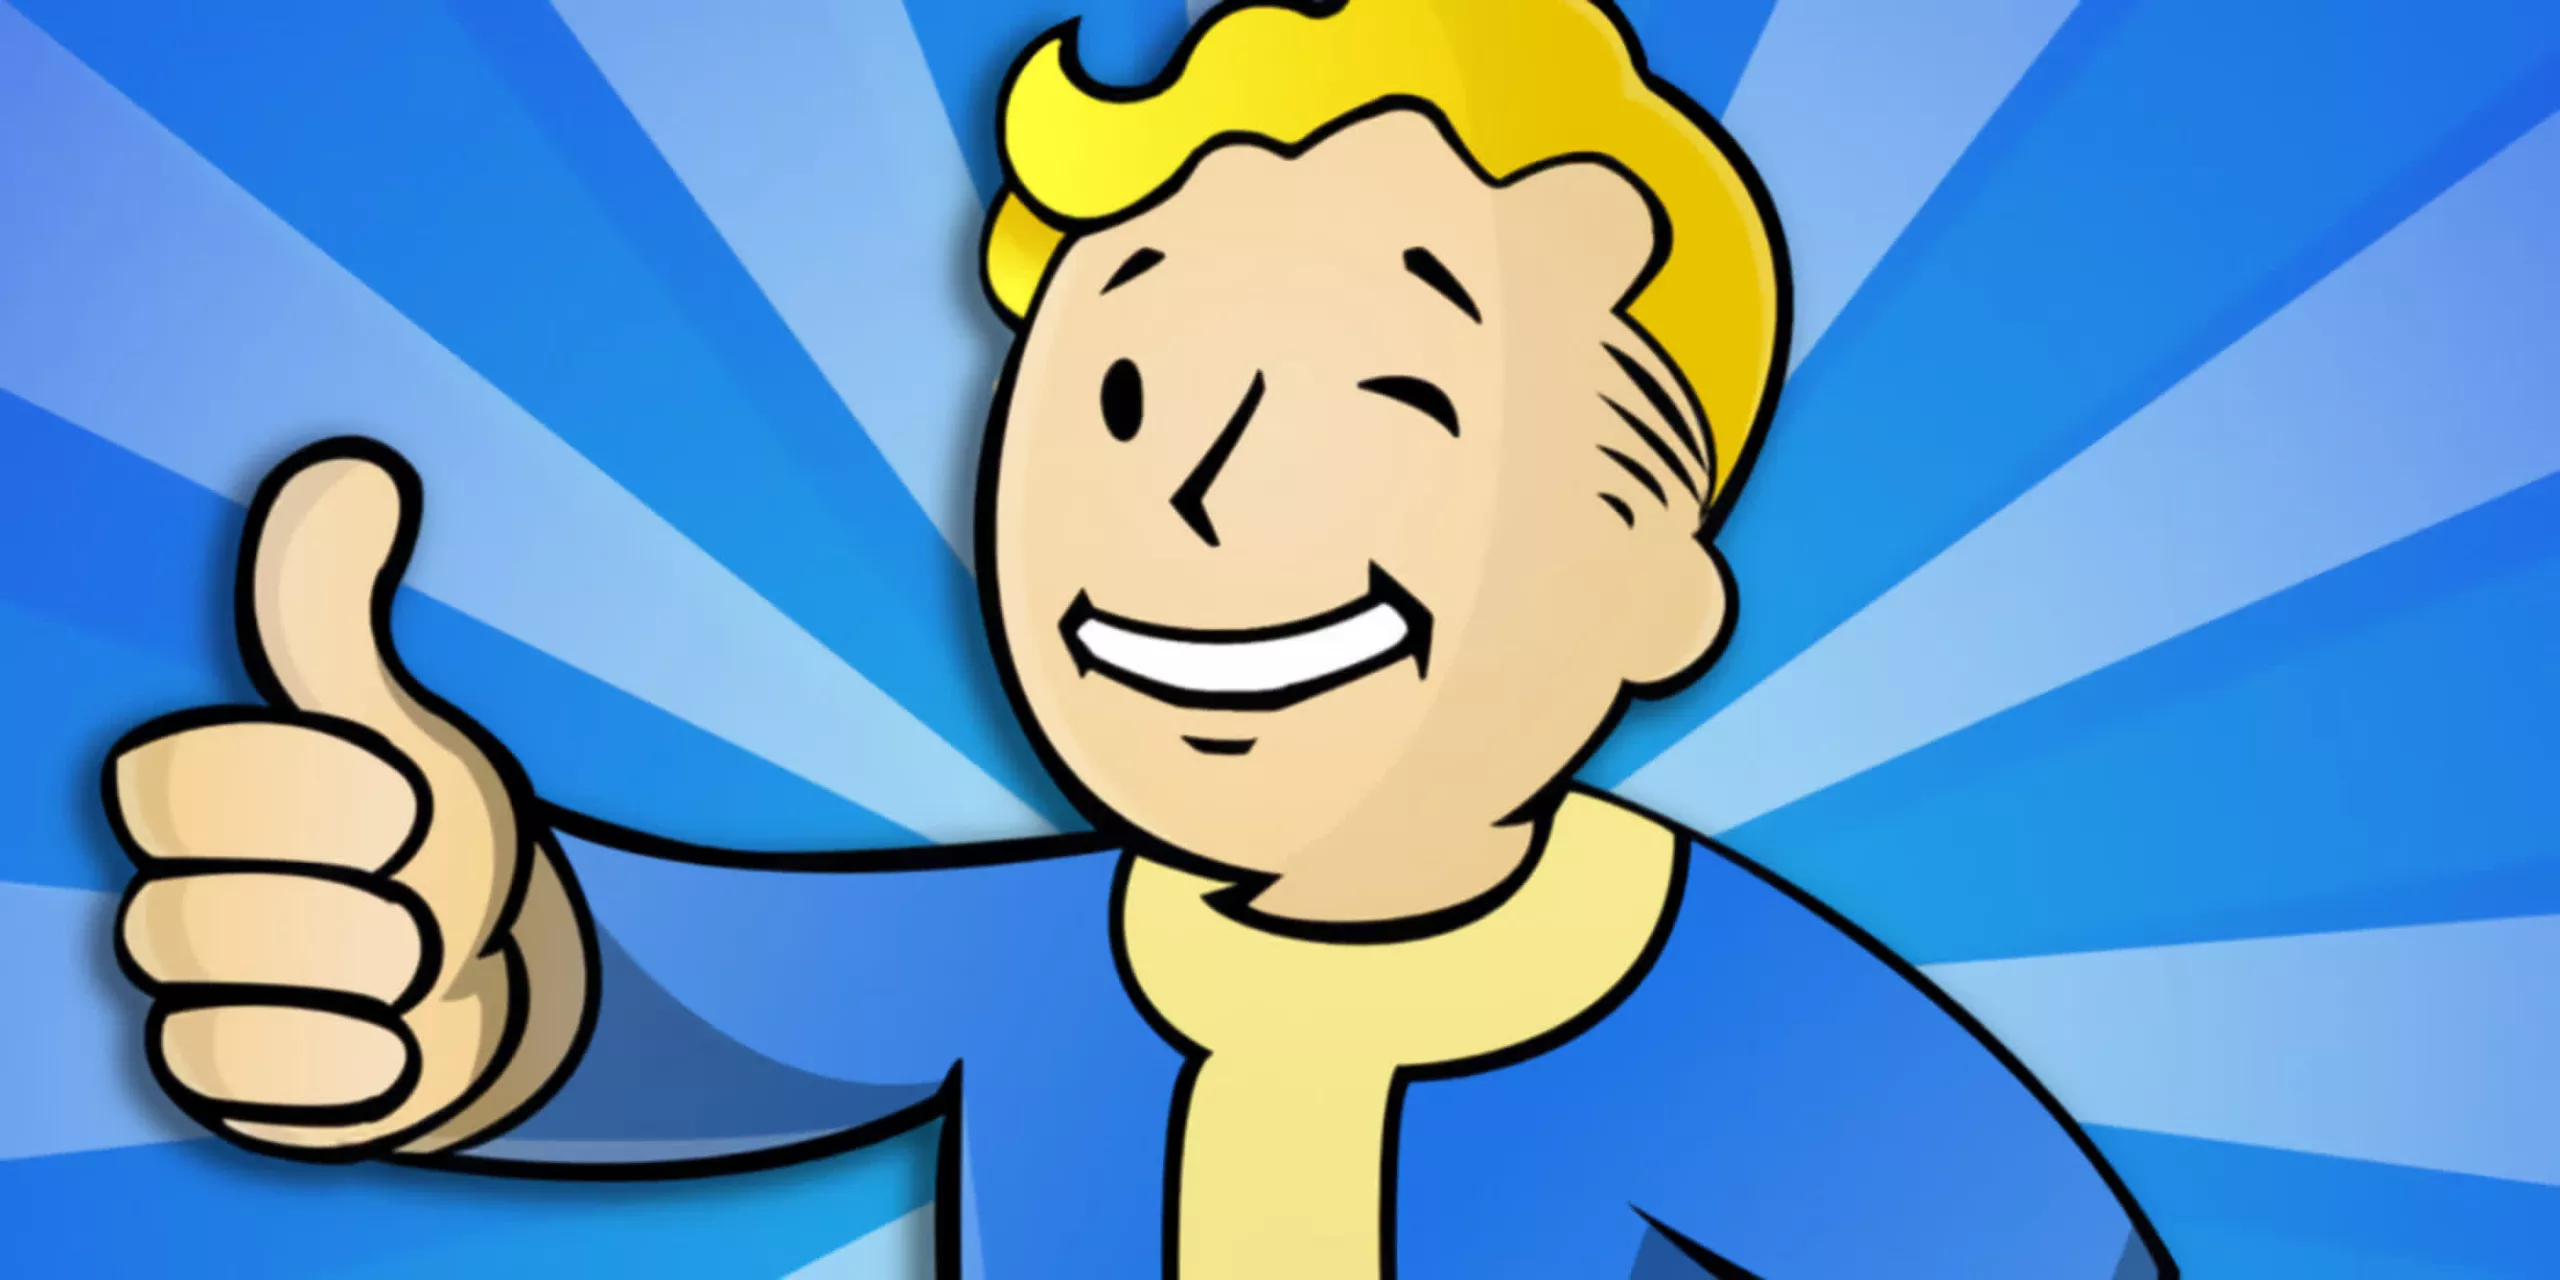 fallout-4-surfs-tidal-wave-of-renewed-interest-to-the-top-of-uk’s-best-seller-list-for-april-[techspot]